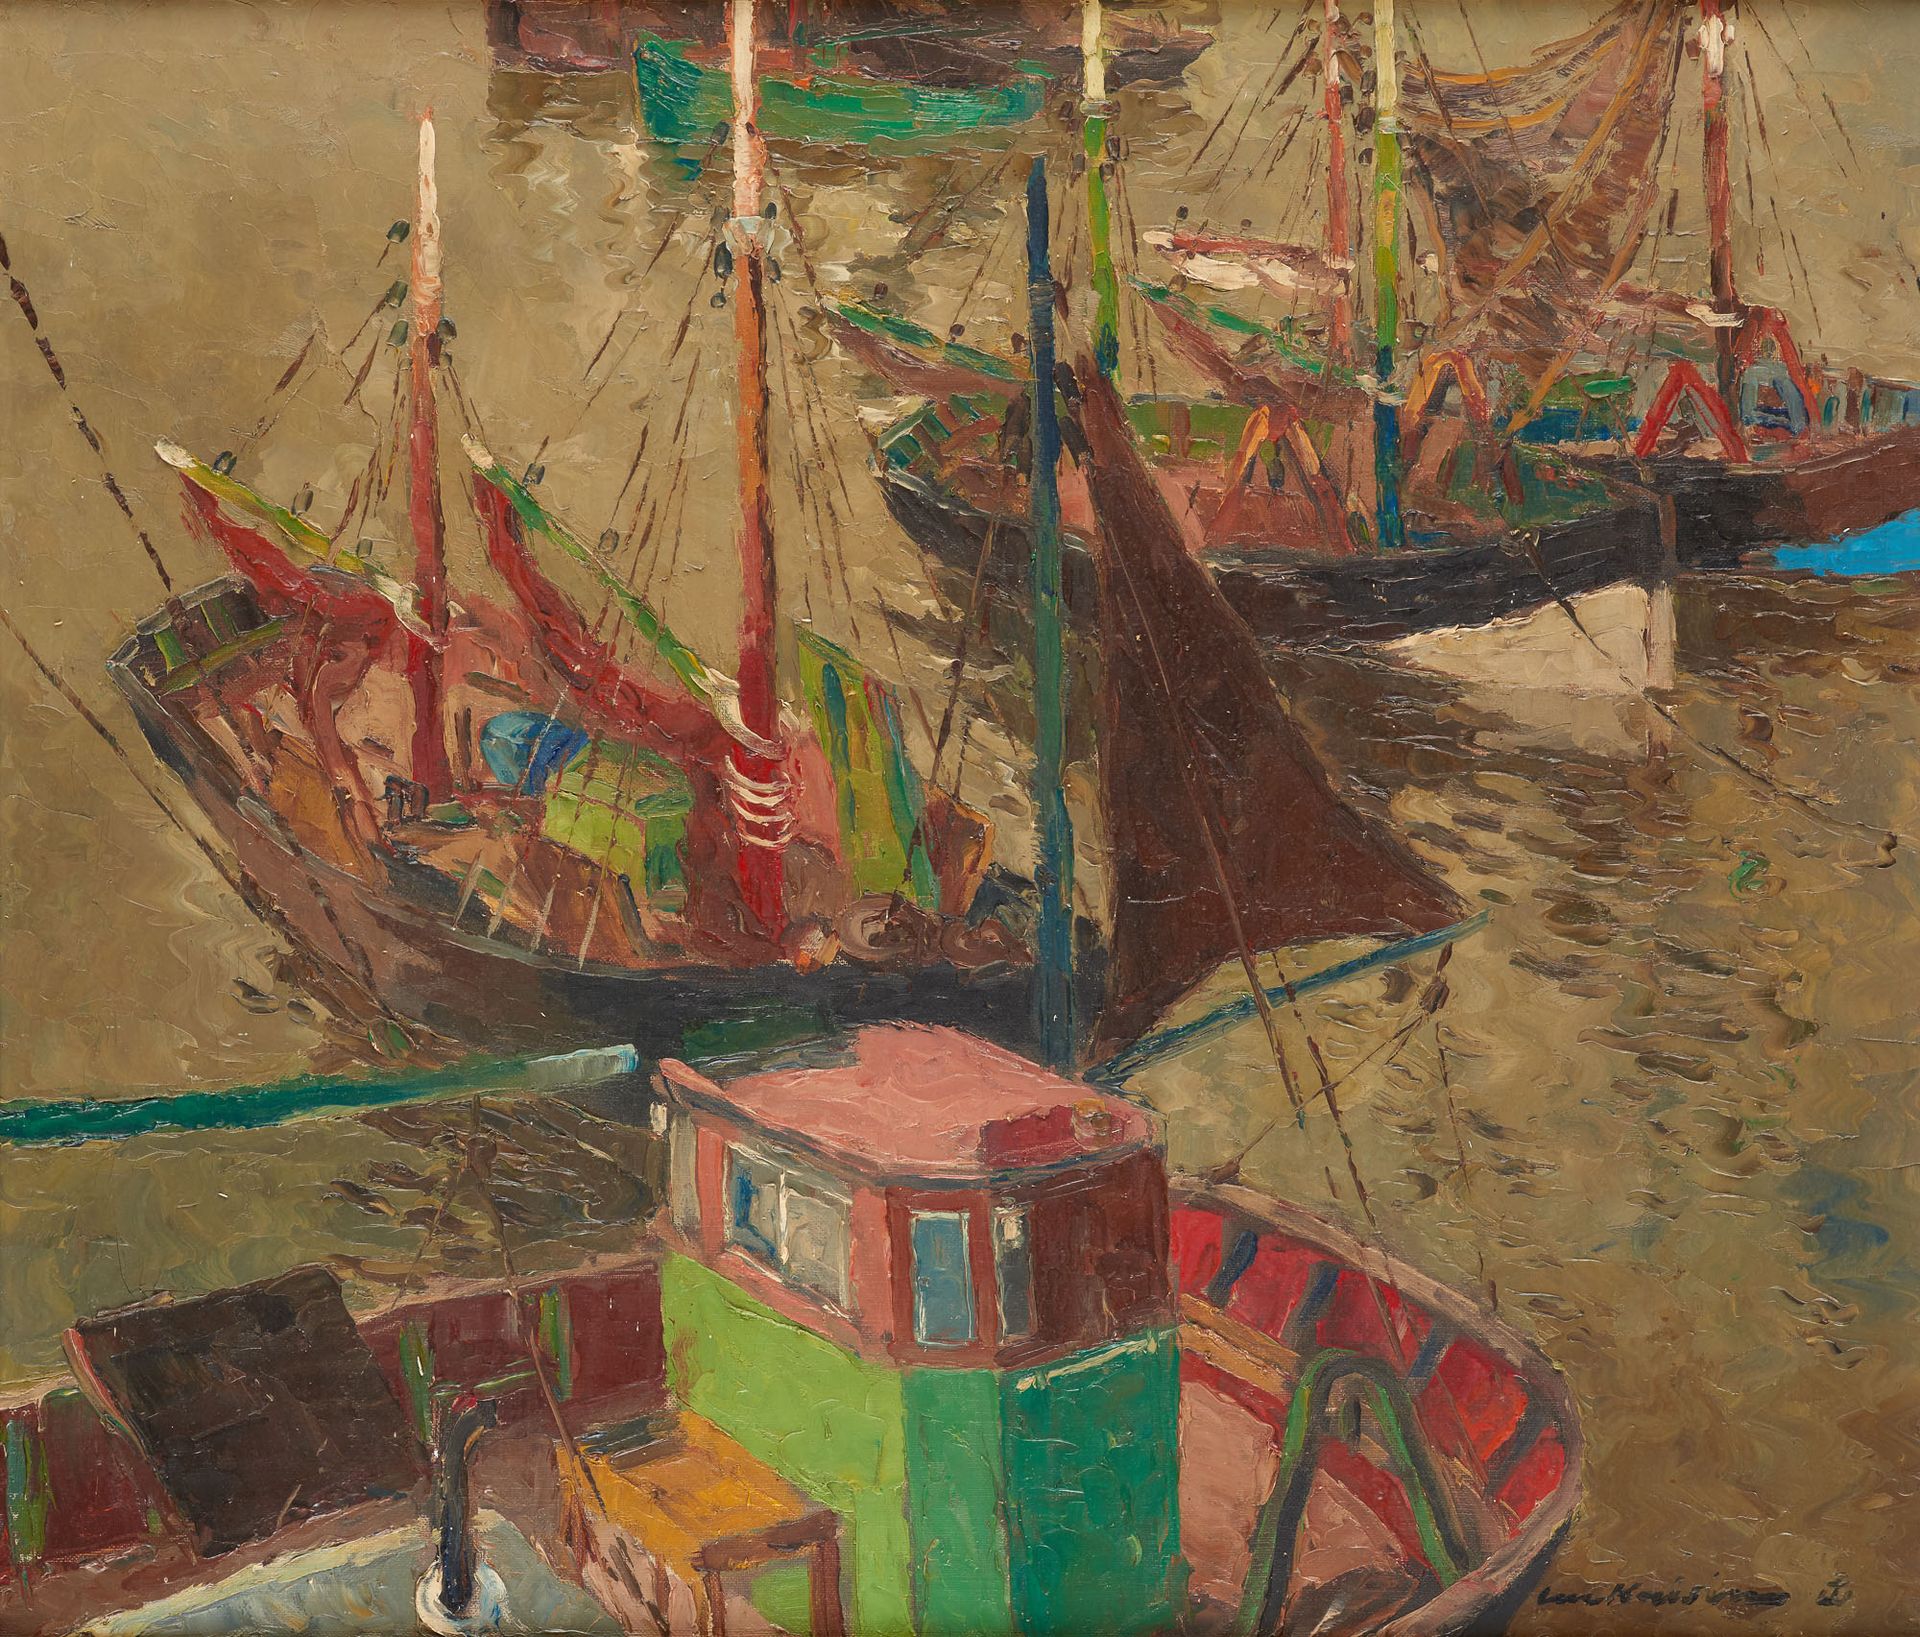 Luc KAISIN École belge (1901-1963) Oil on canvas: Fishing boats in the port.

Si&hellip;